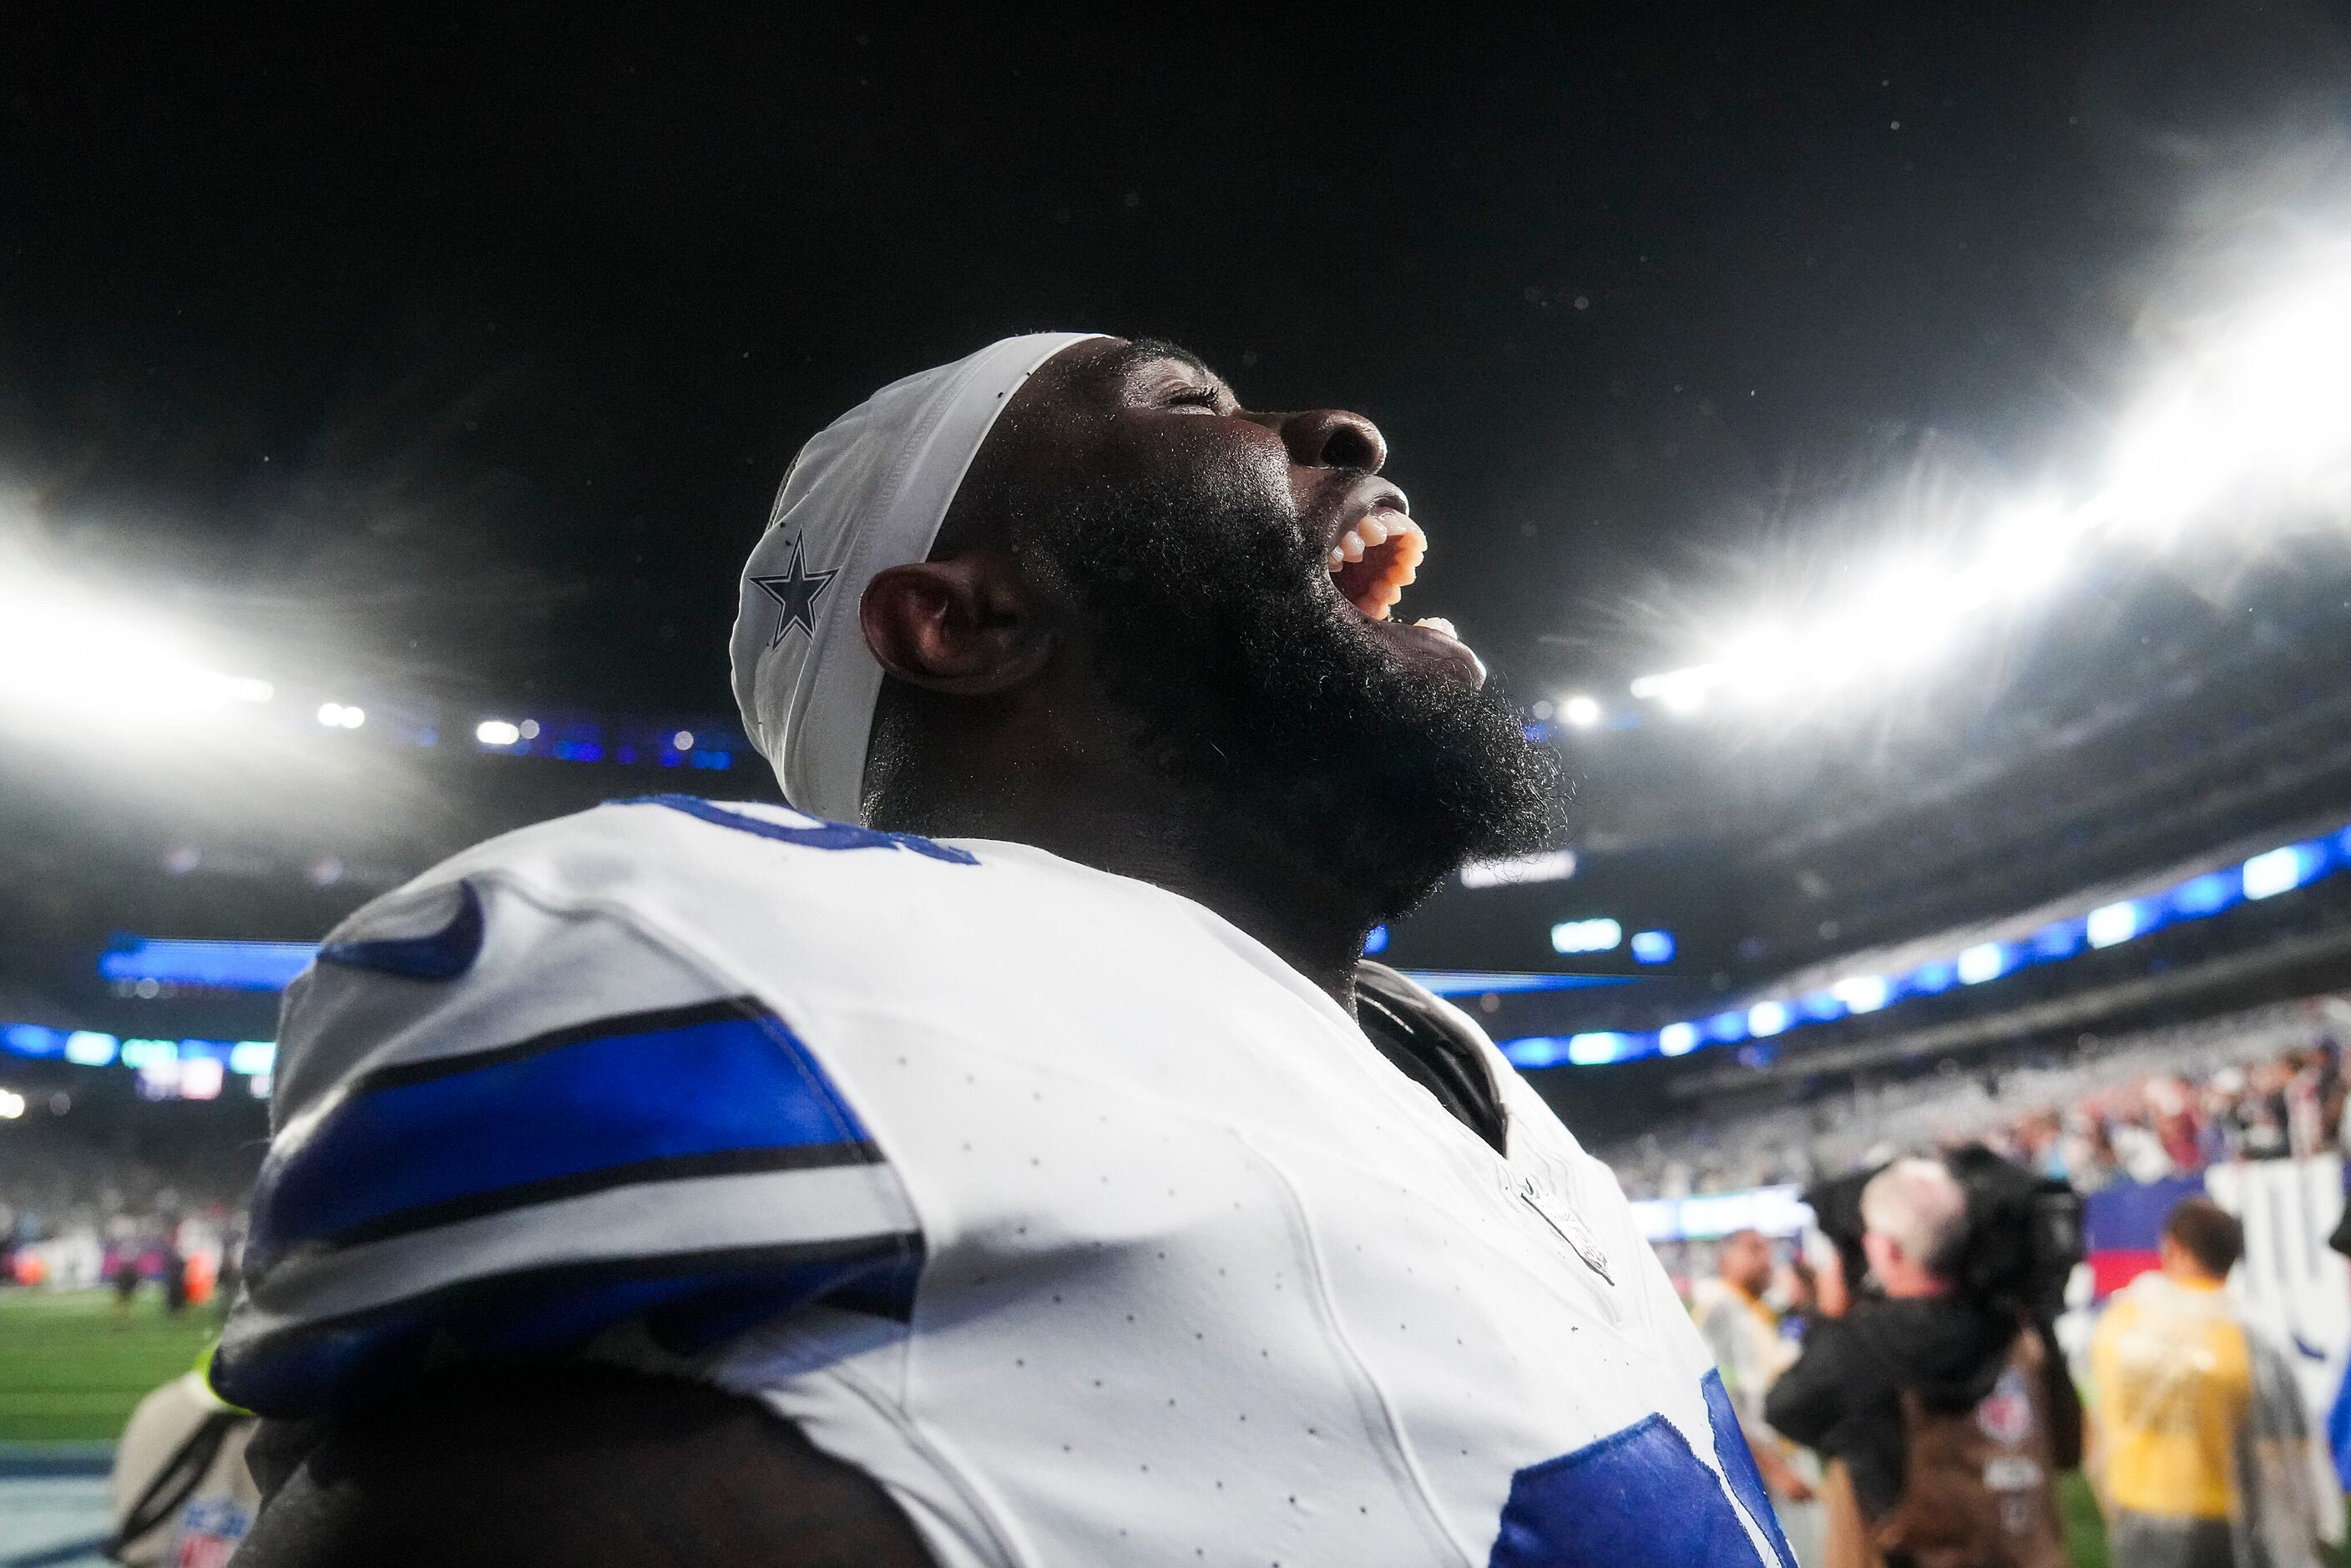 Dallas Cowboys send message with dominant 40-0 victory over New